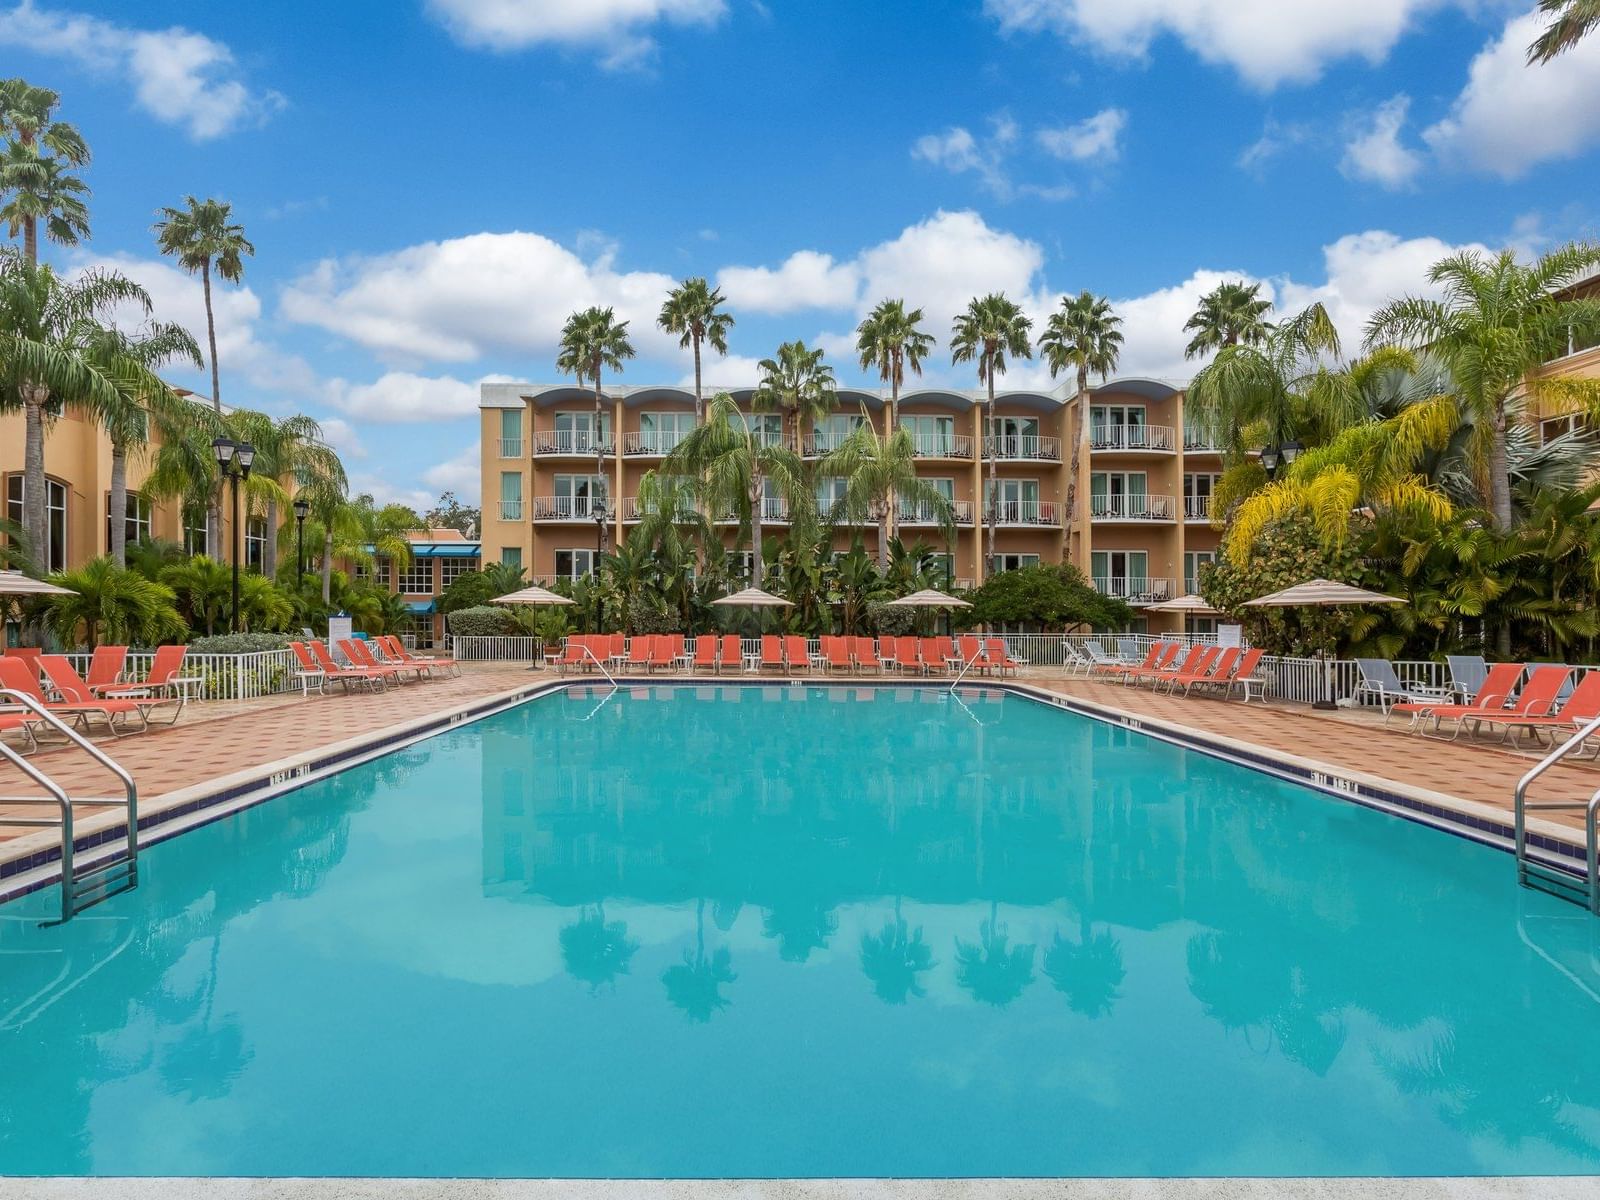 Outdoor pool & Exterior of Safety Harbor & Resort